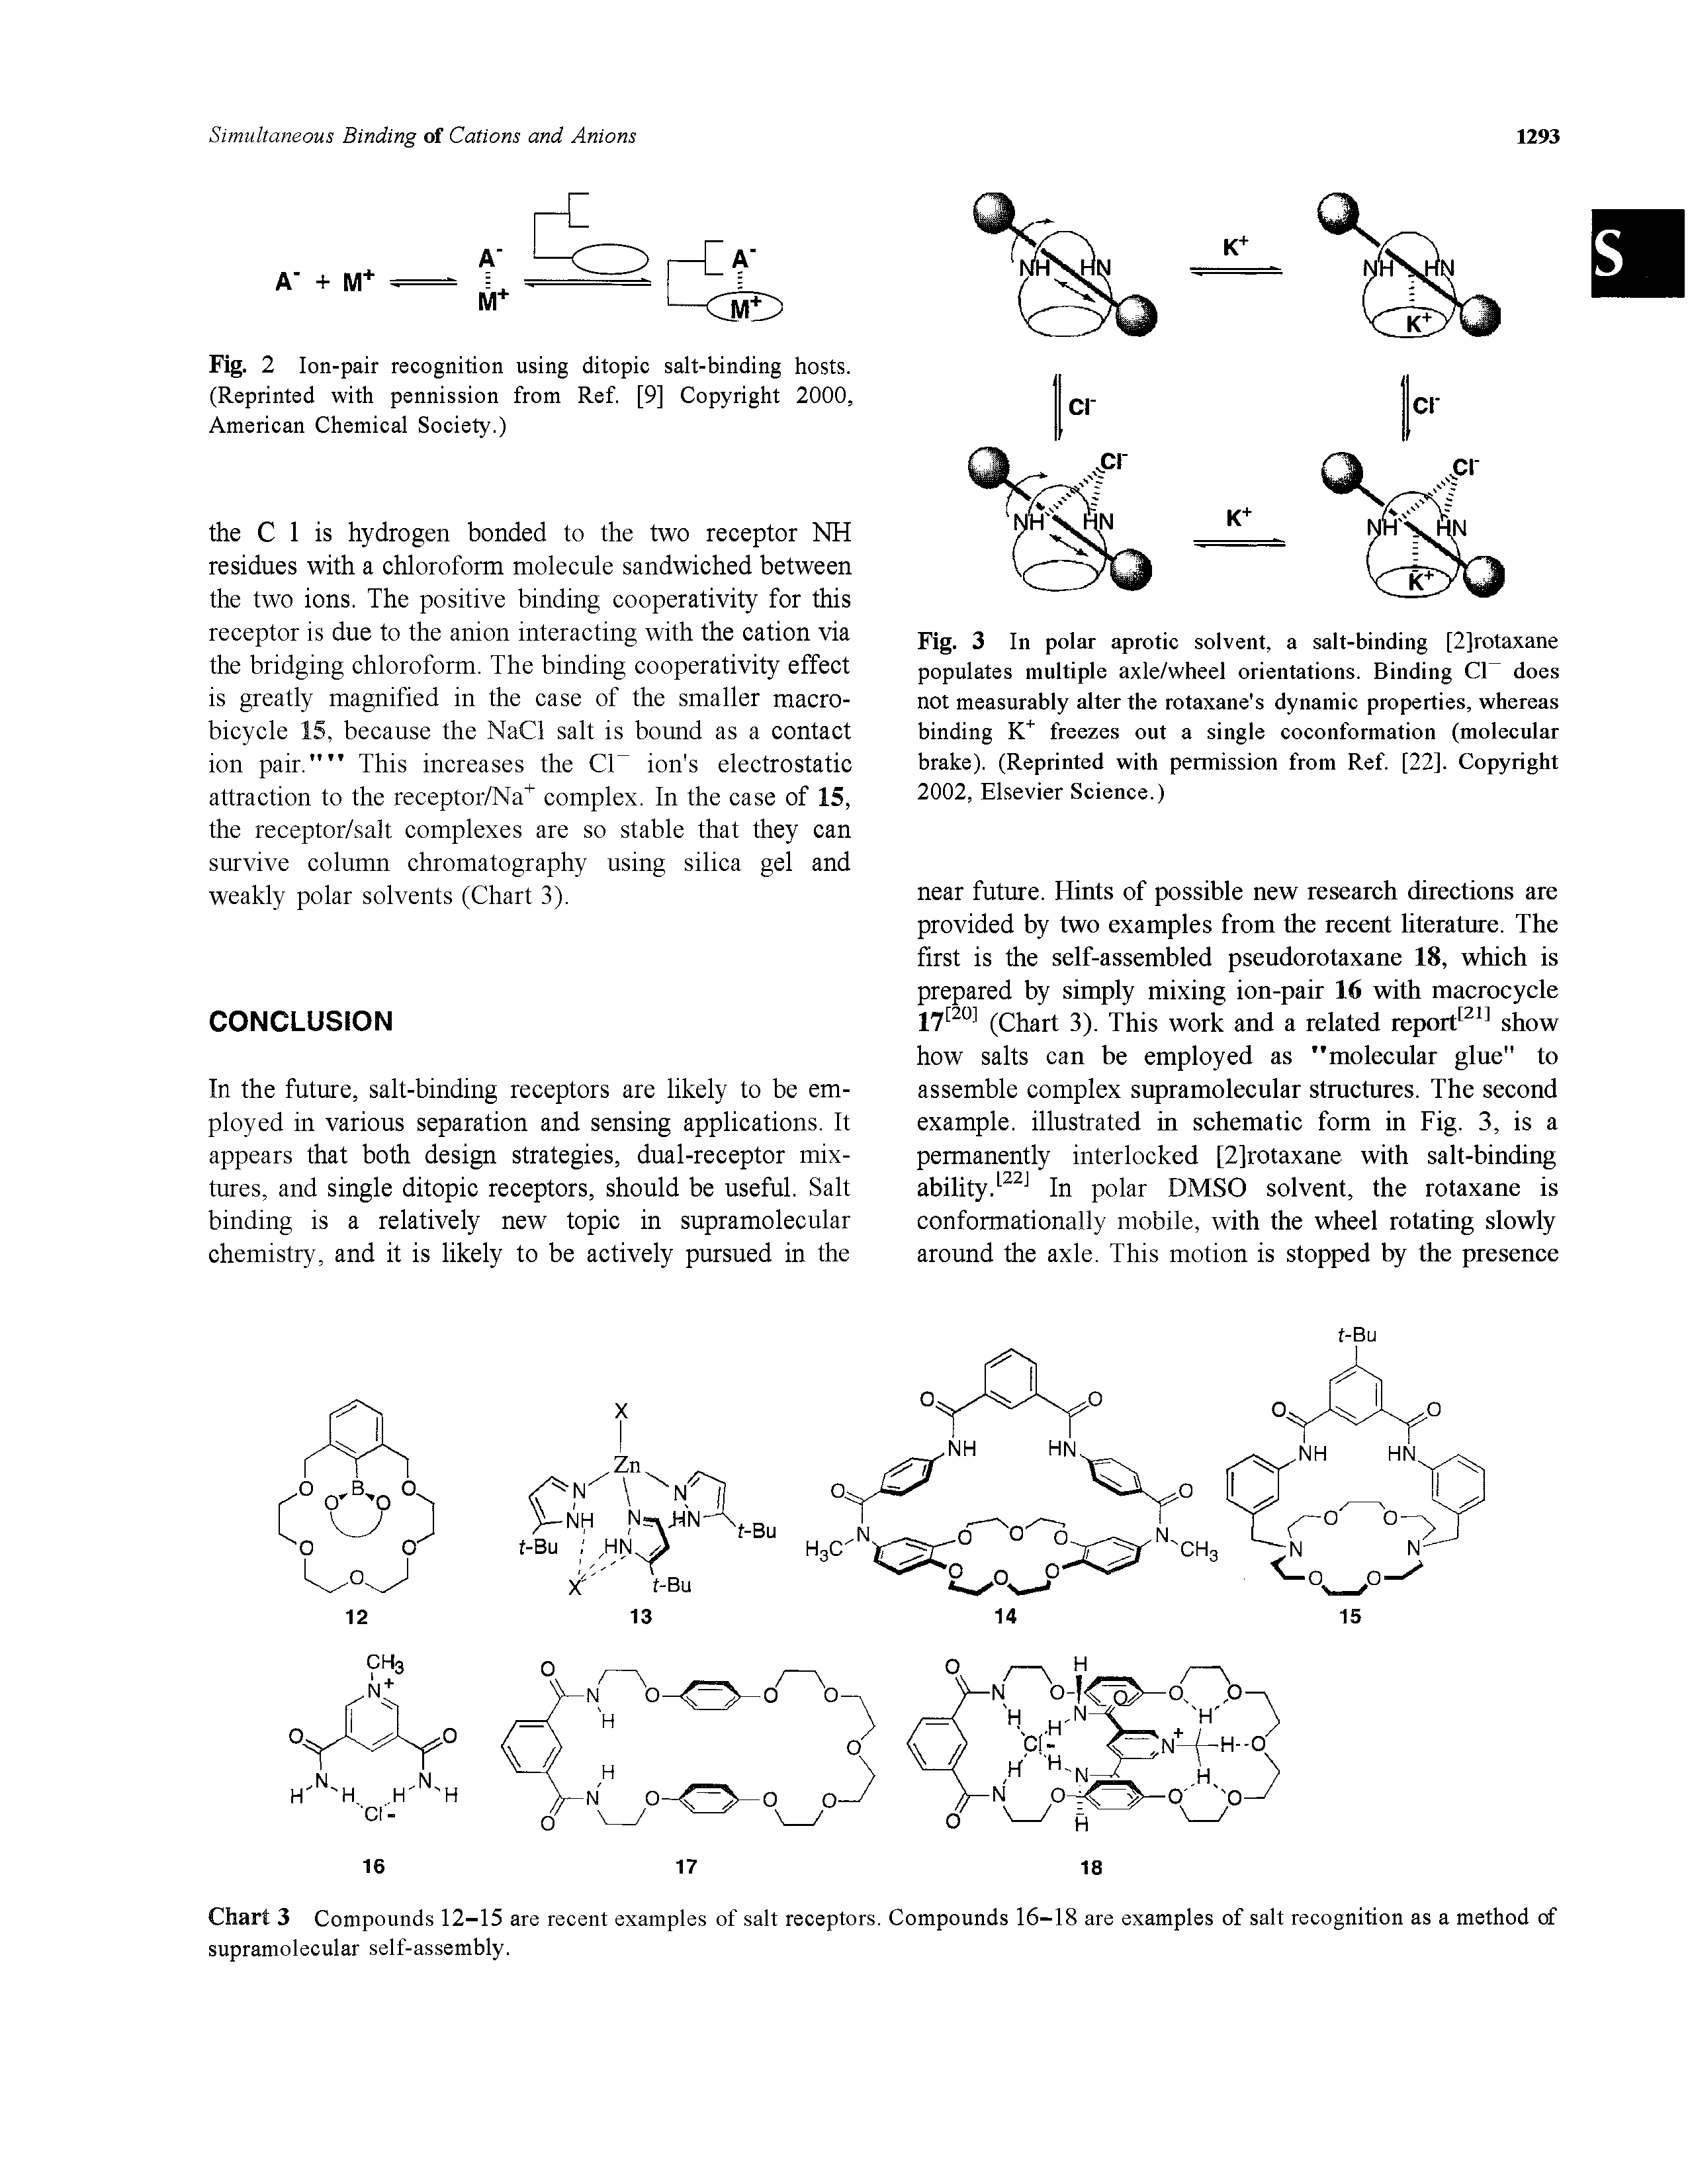 Fig. 2 Ion-pair recognition using ditopic salt-binding hosts. (Reprinted with pennission from Ref. [9] Copyright 2000, American Chemical Society.)...